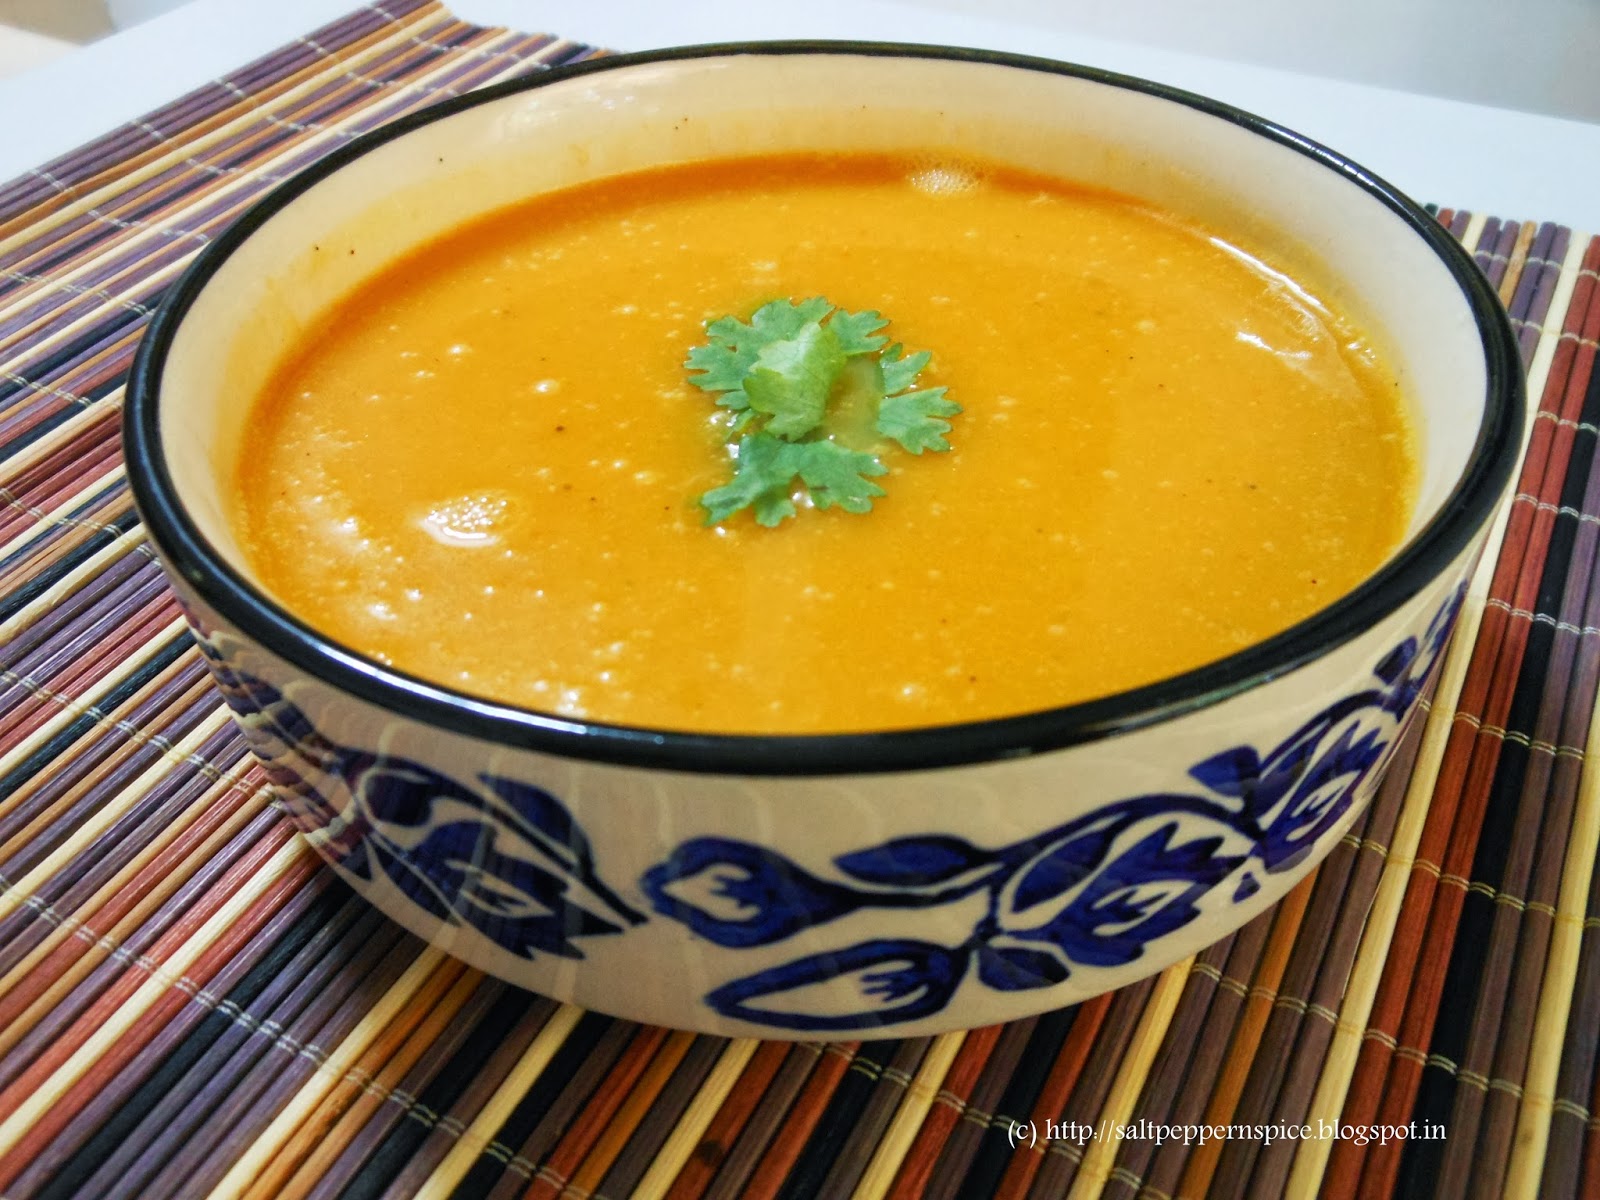 Salt And Pepper With A Lot Of Spice Pumpkin Soup With A Mirepoix Base